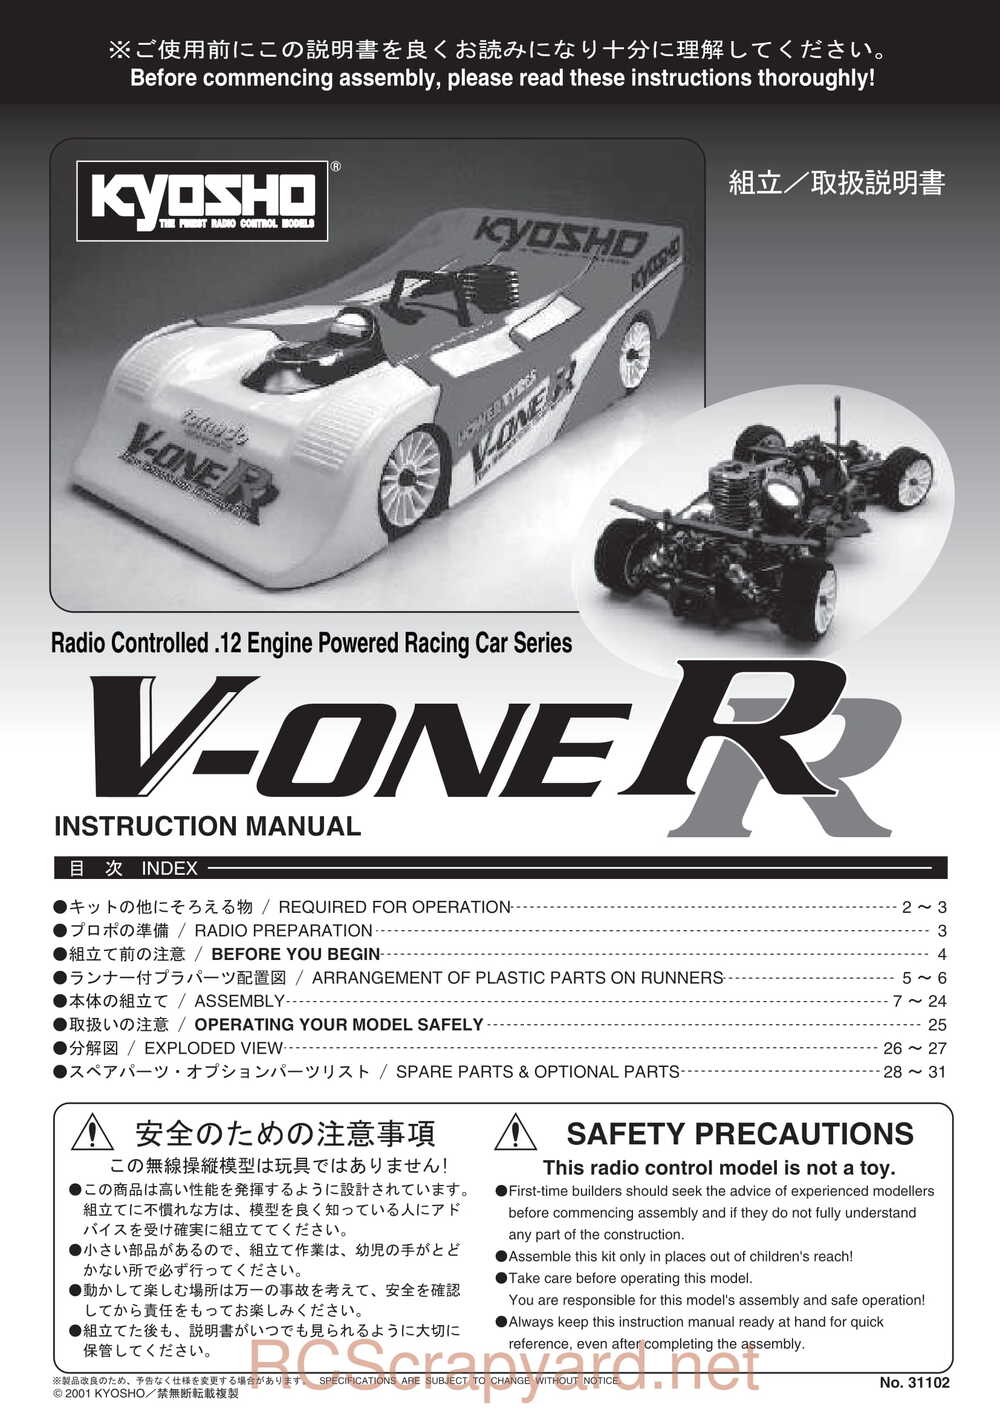 Kyosho - 31102 - V-One RR - Manual - Page 01